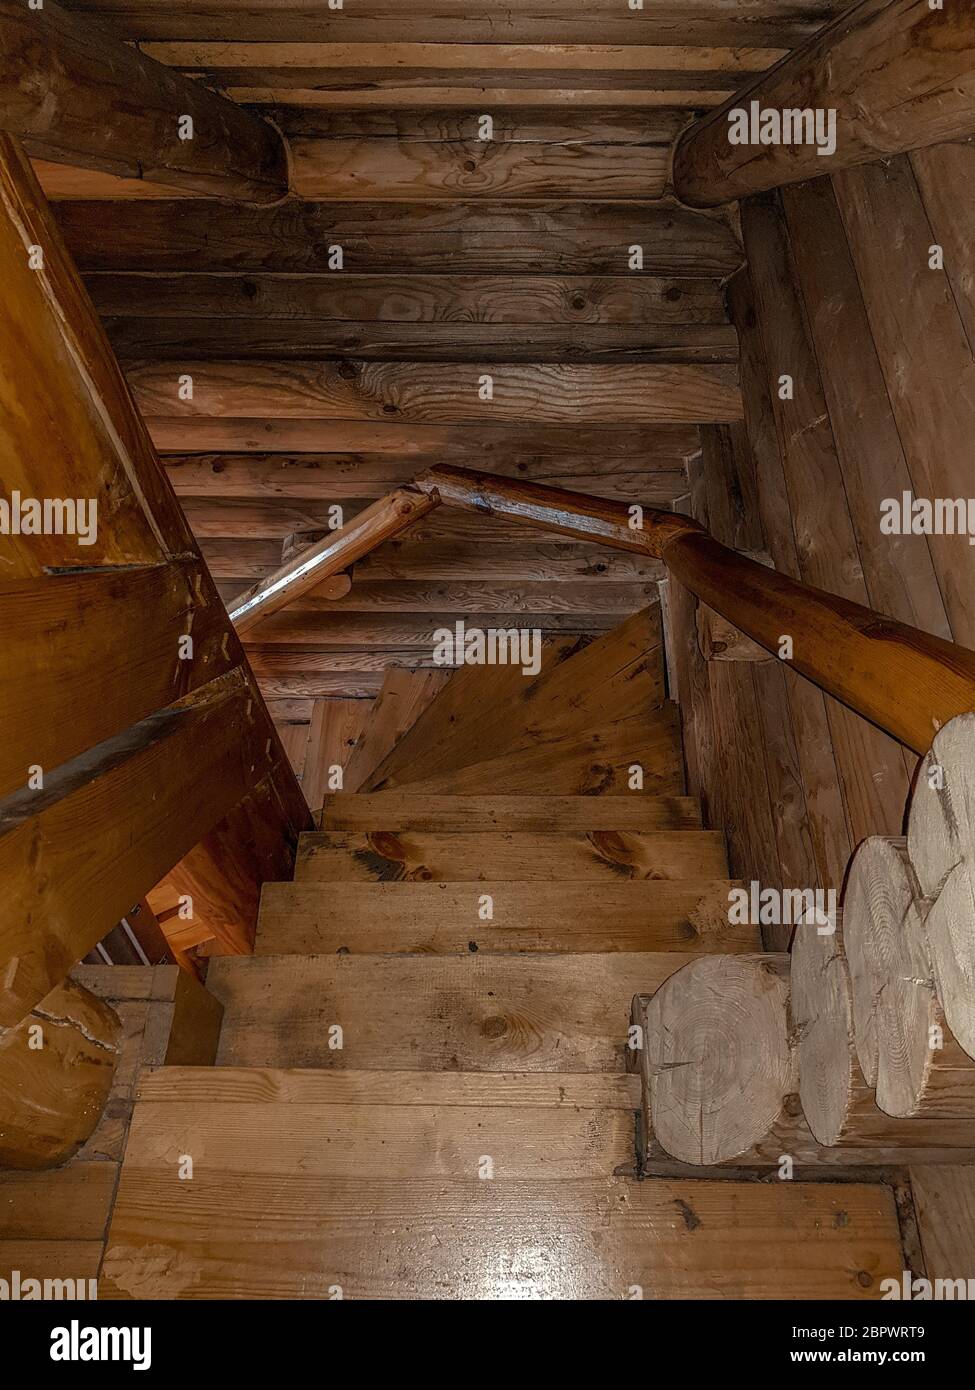 A staircase with a spiral descent, folded wooden steps, covered with a dark brown varnish of a traditional design in a house with a log house. Stock Photo